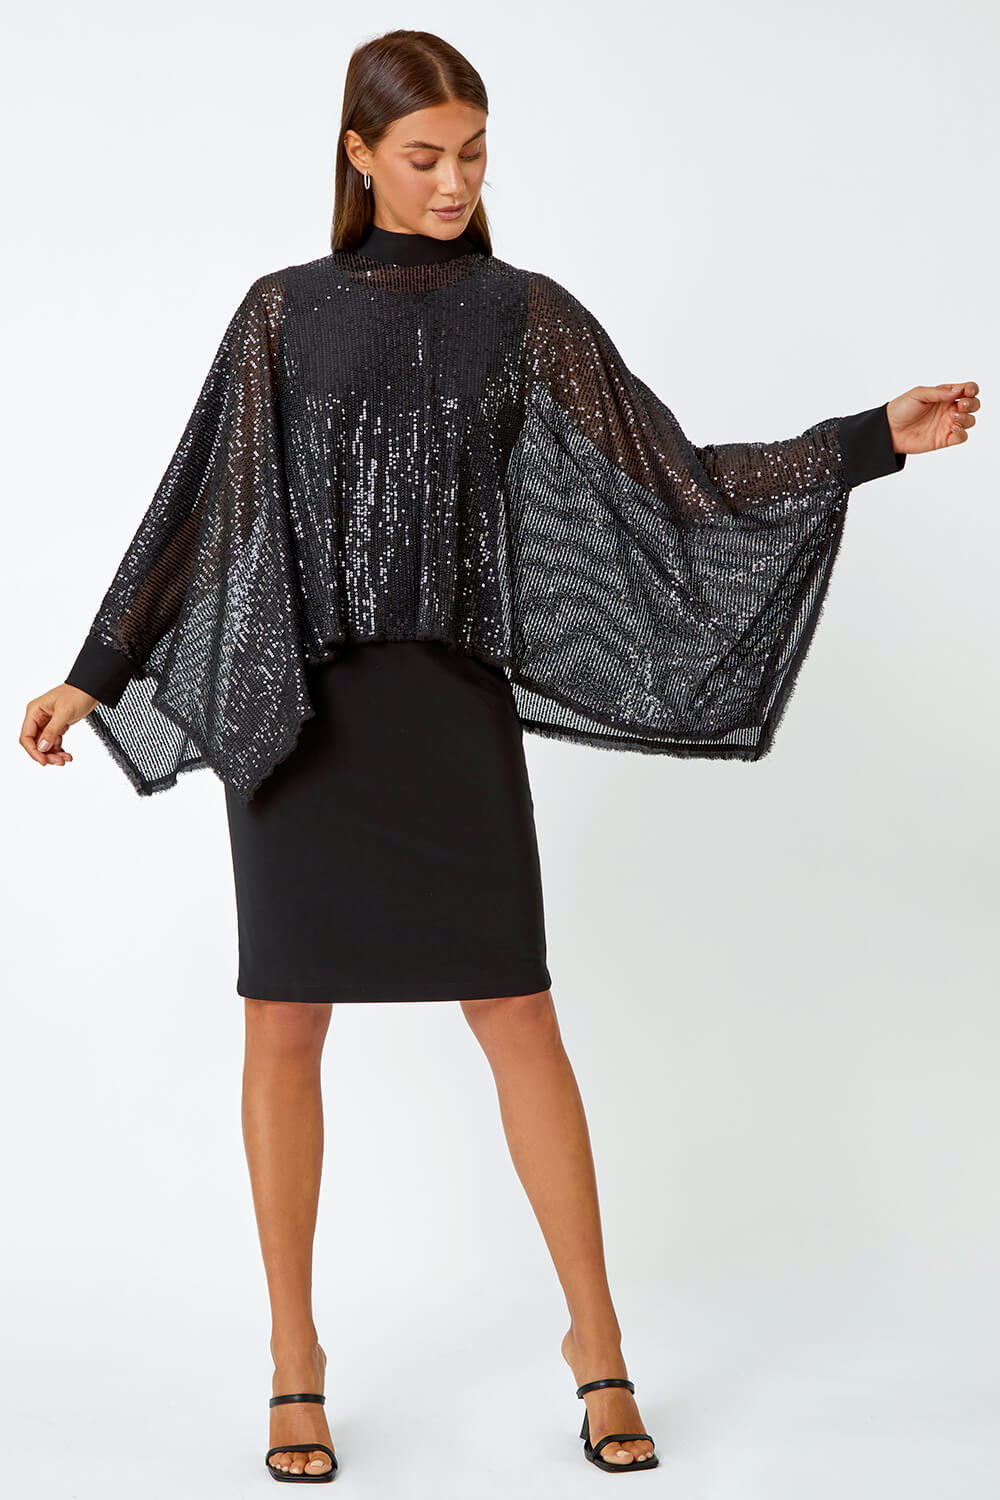 Black Sequin Overlay Bodycon Stretch Dress, Image 1 of 5